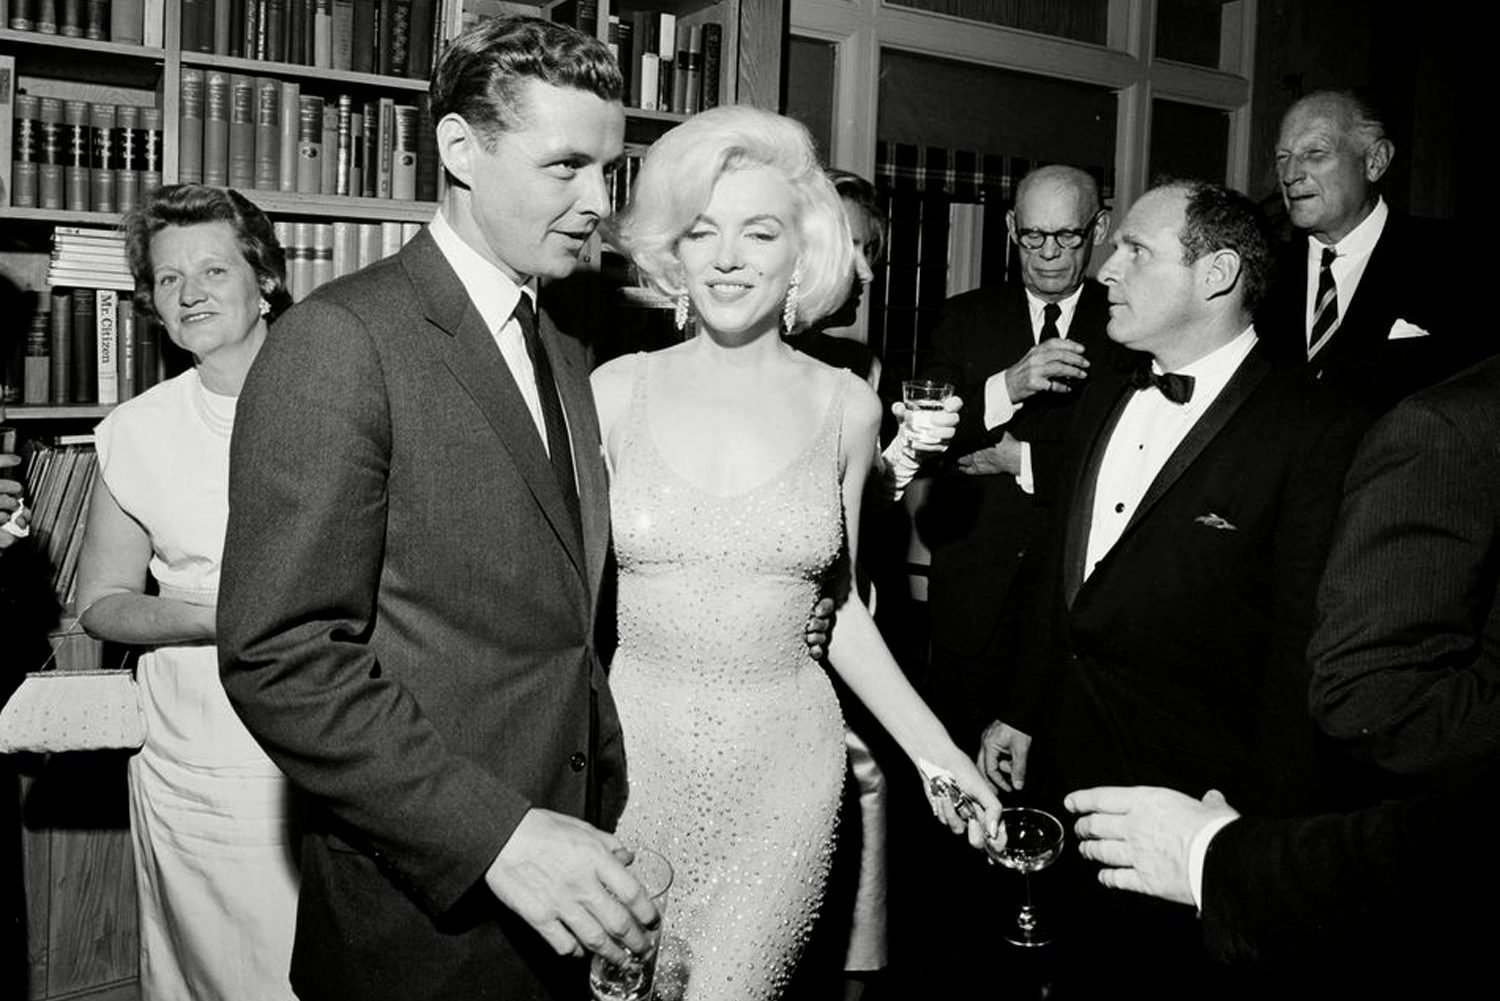 The Story Behind Marilyn Monroe's Infamous "Happy Birthday" Dress